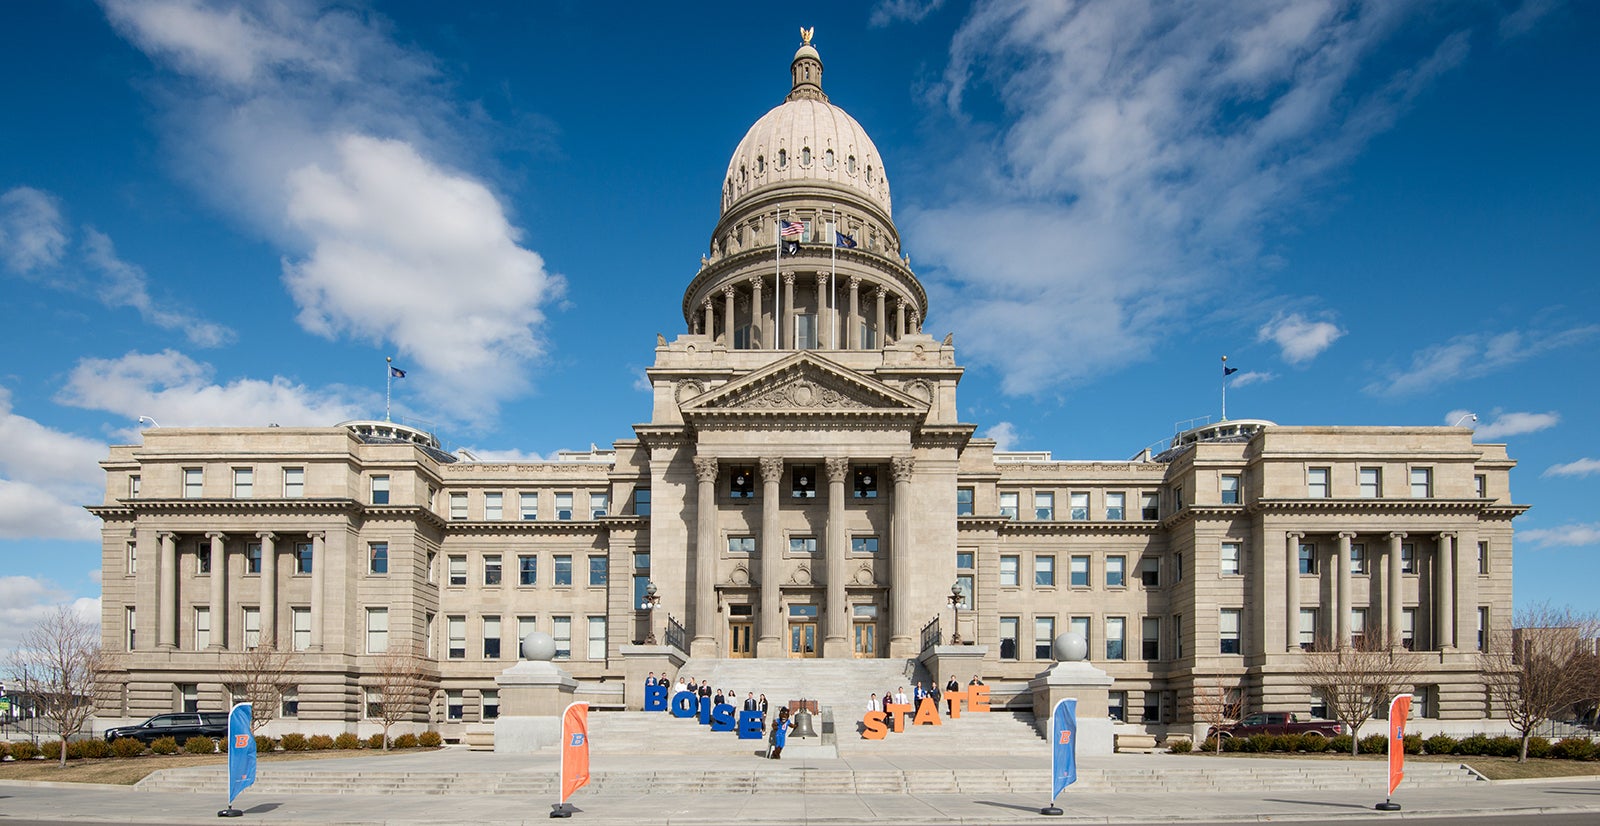 Boise State Day at the Idaho State Capitol Building. Photo by Allison Corona.